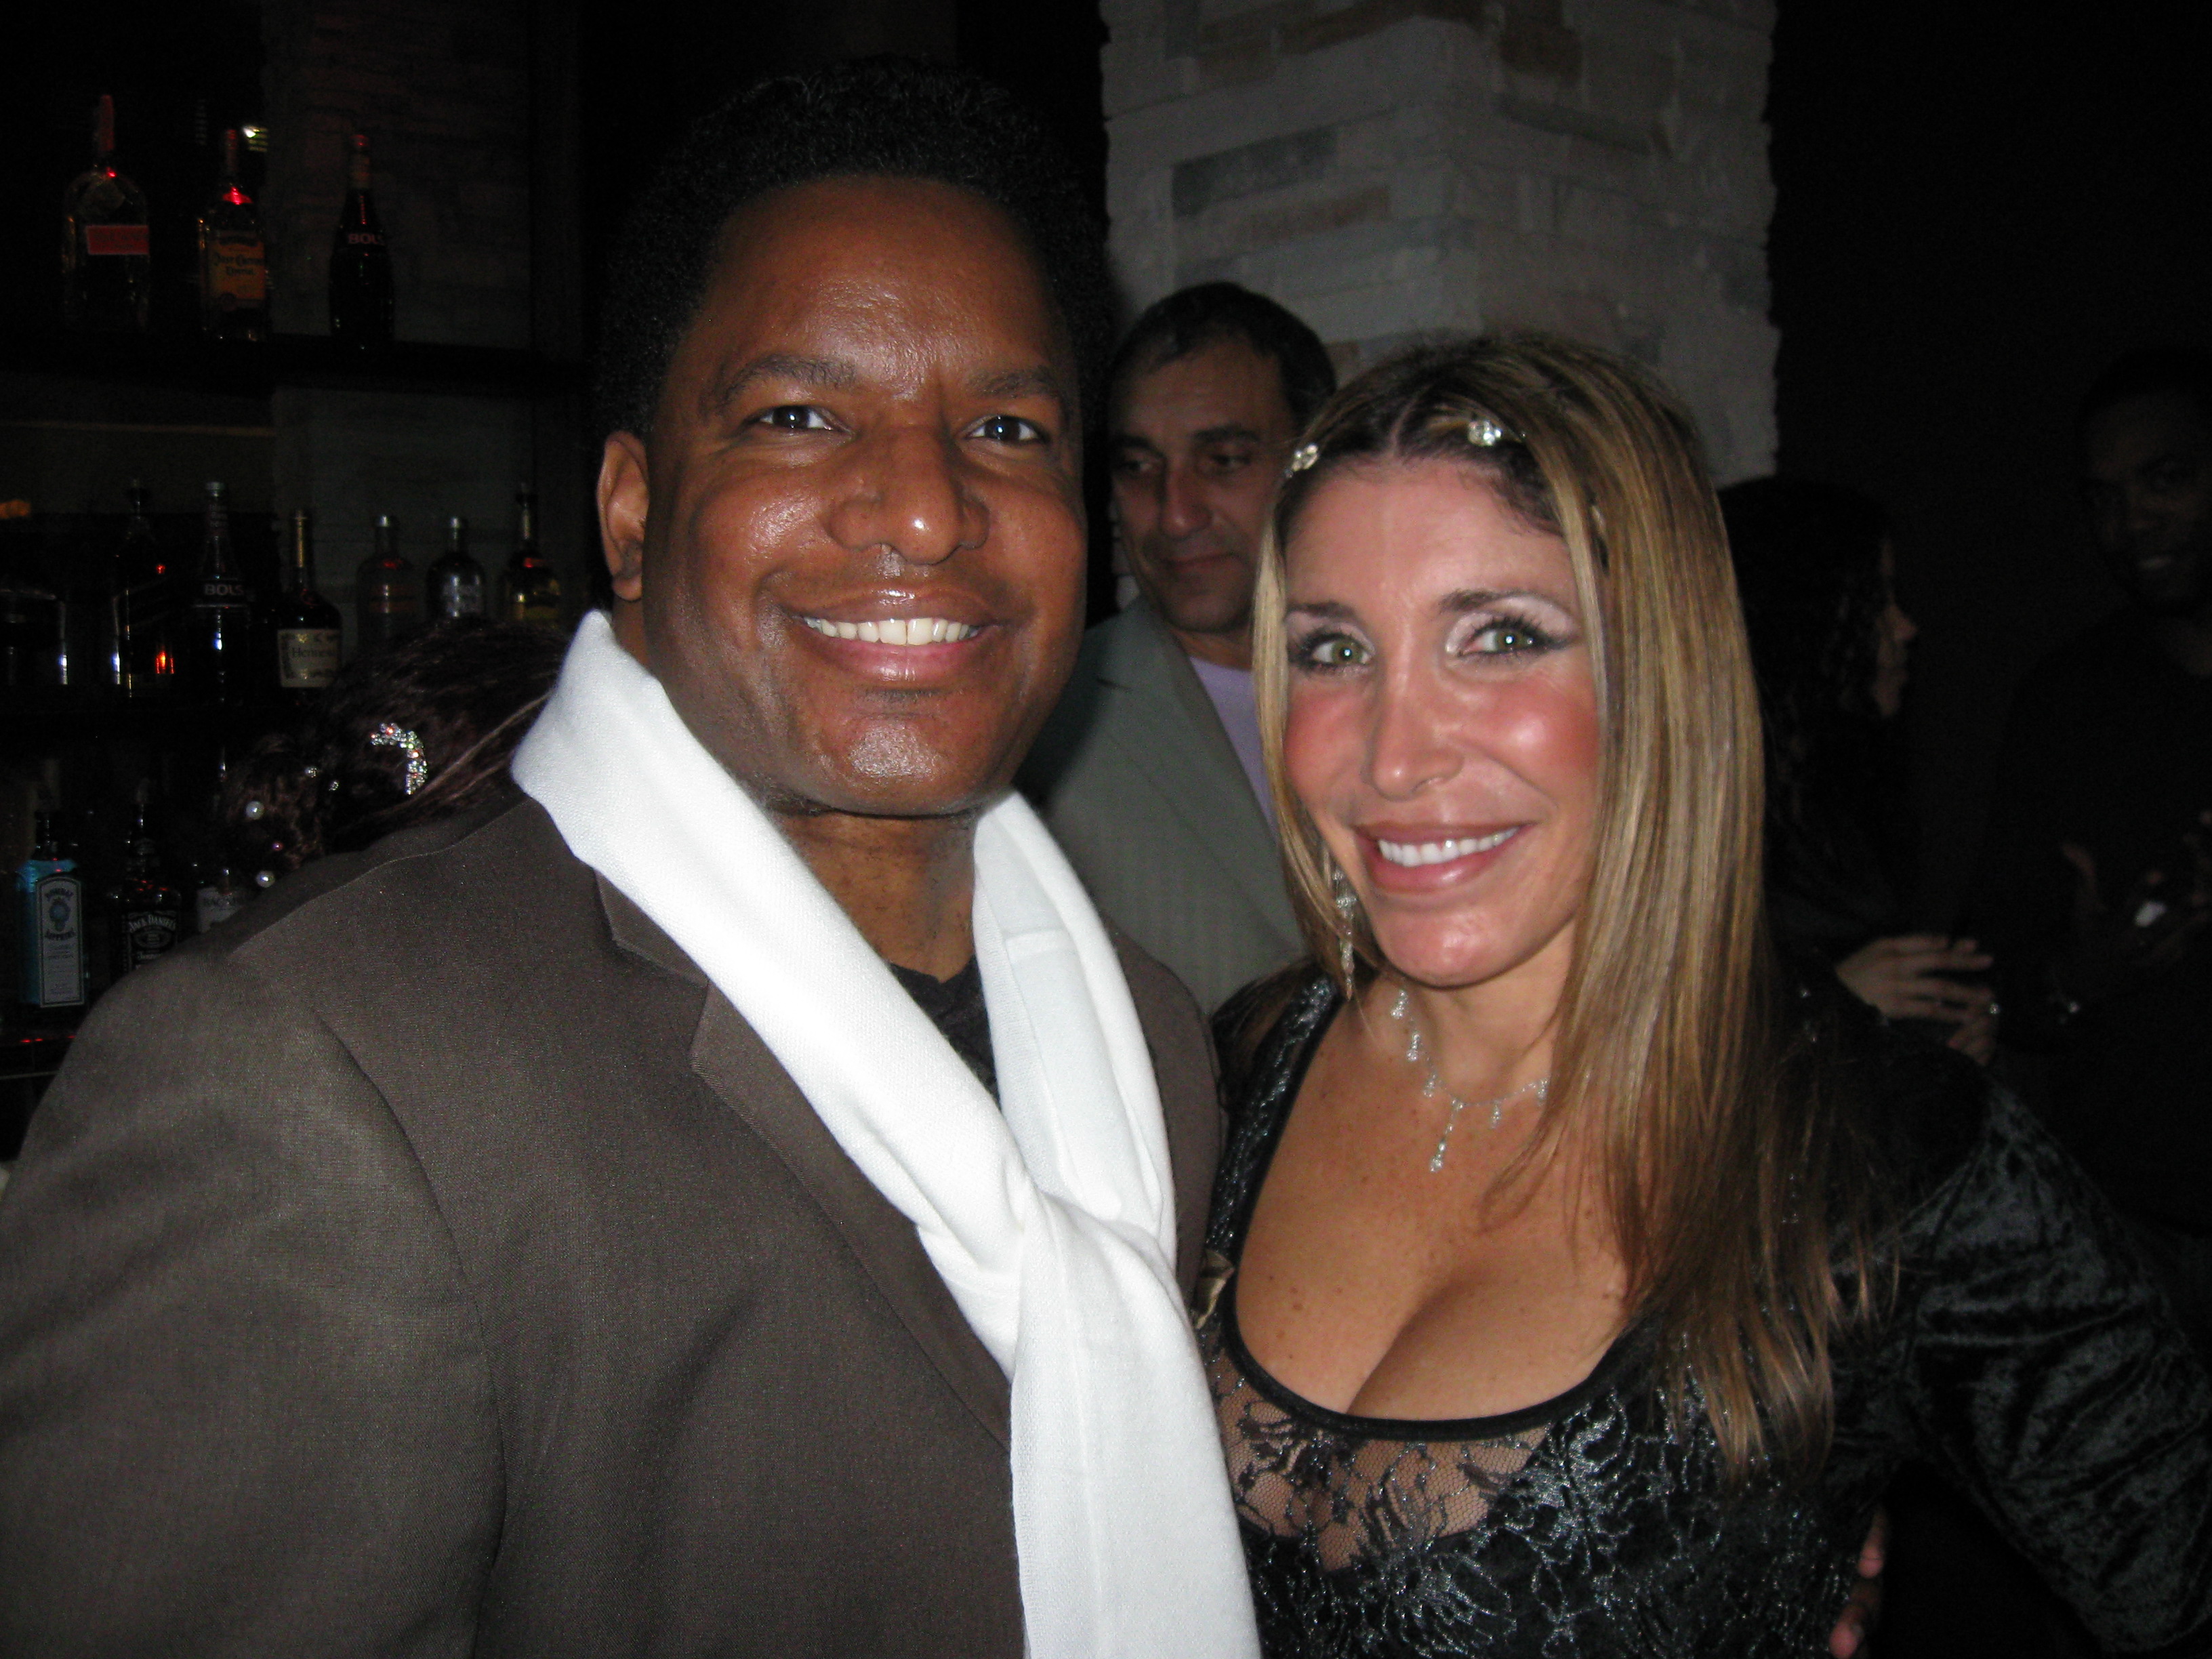 with my friend, Heather S. Michaels at a David Harrison Levi event in Beverly Hills.